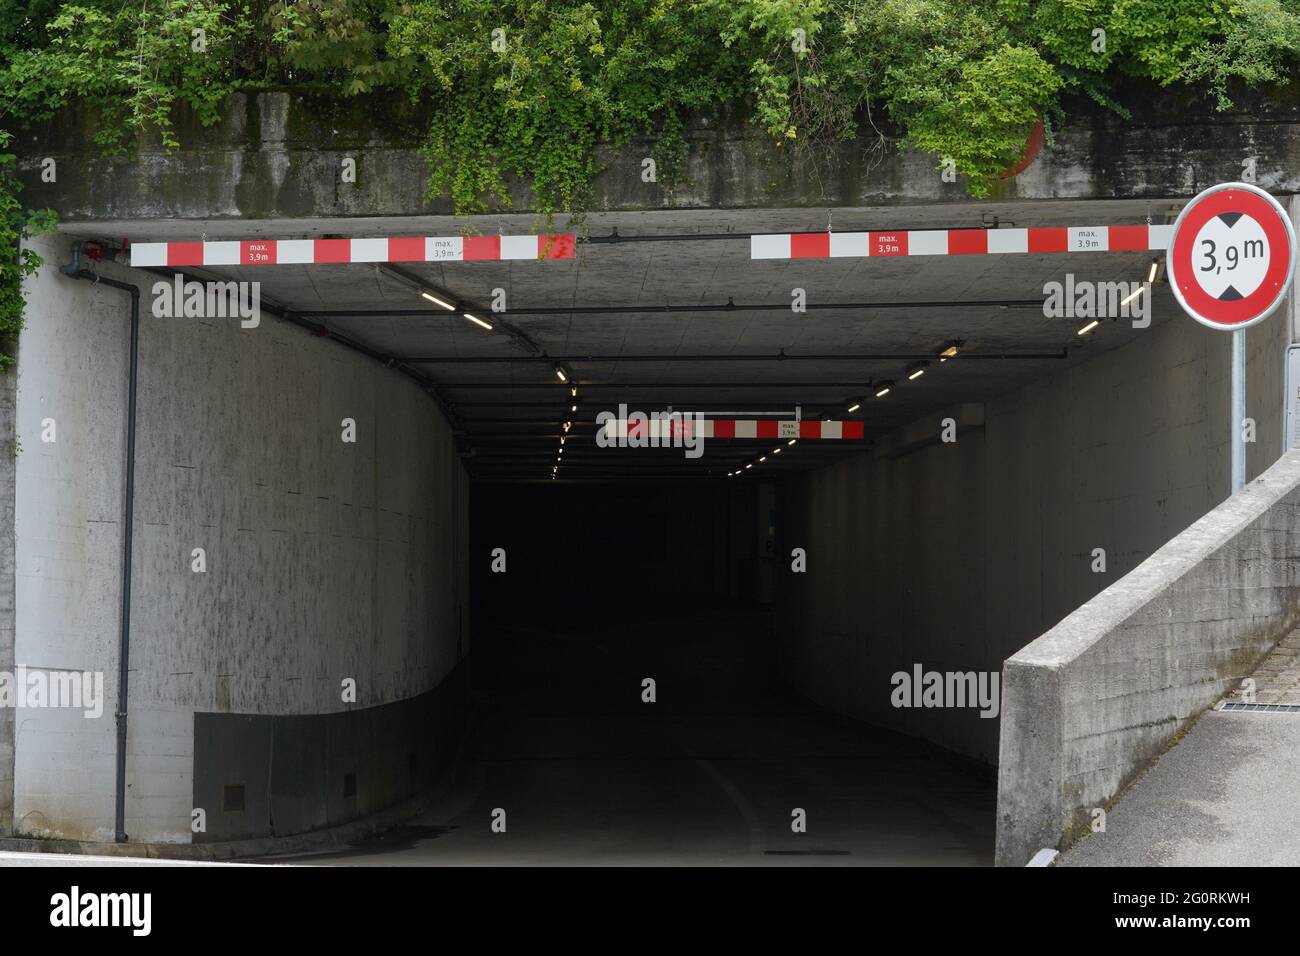 Entrance to a underground parking lot. There is height limit 3.9 m sign for vehicles. Stock Photo